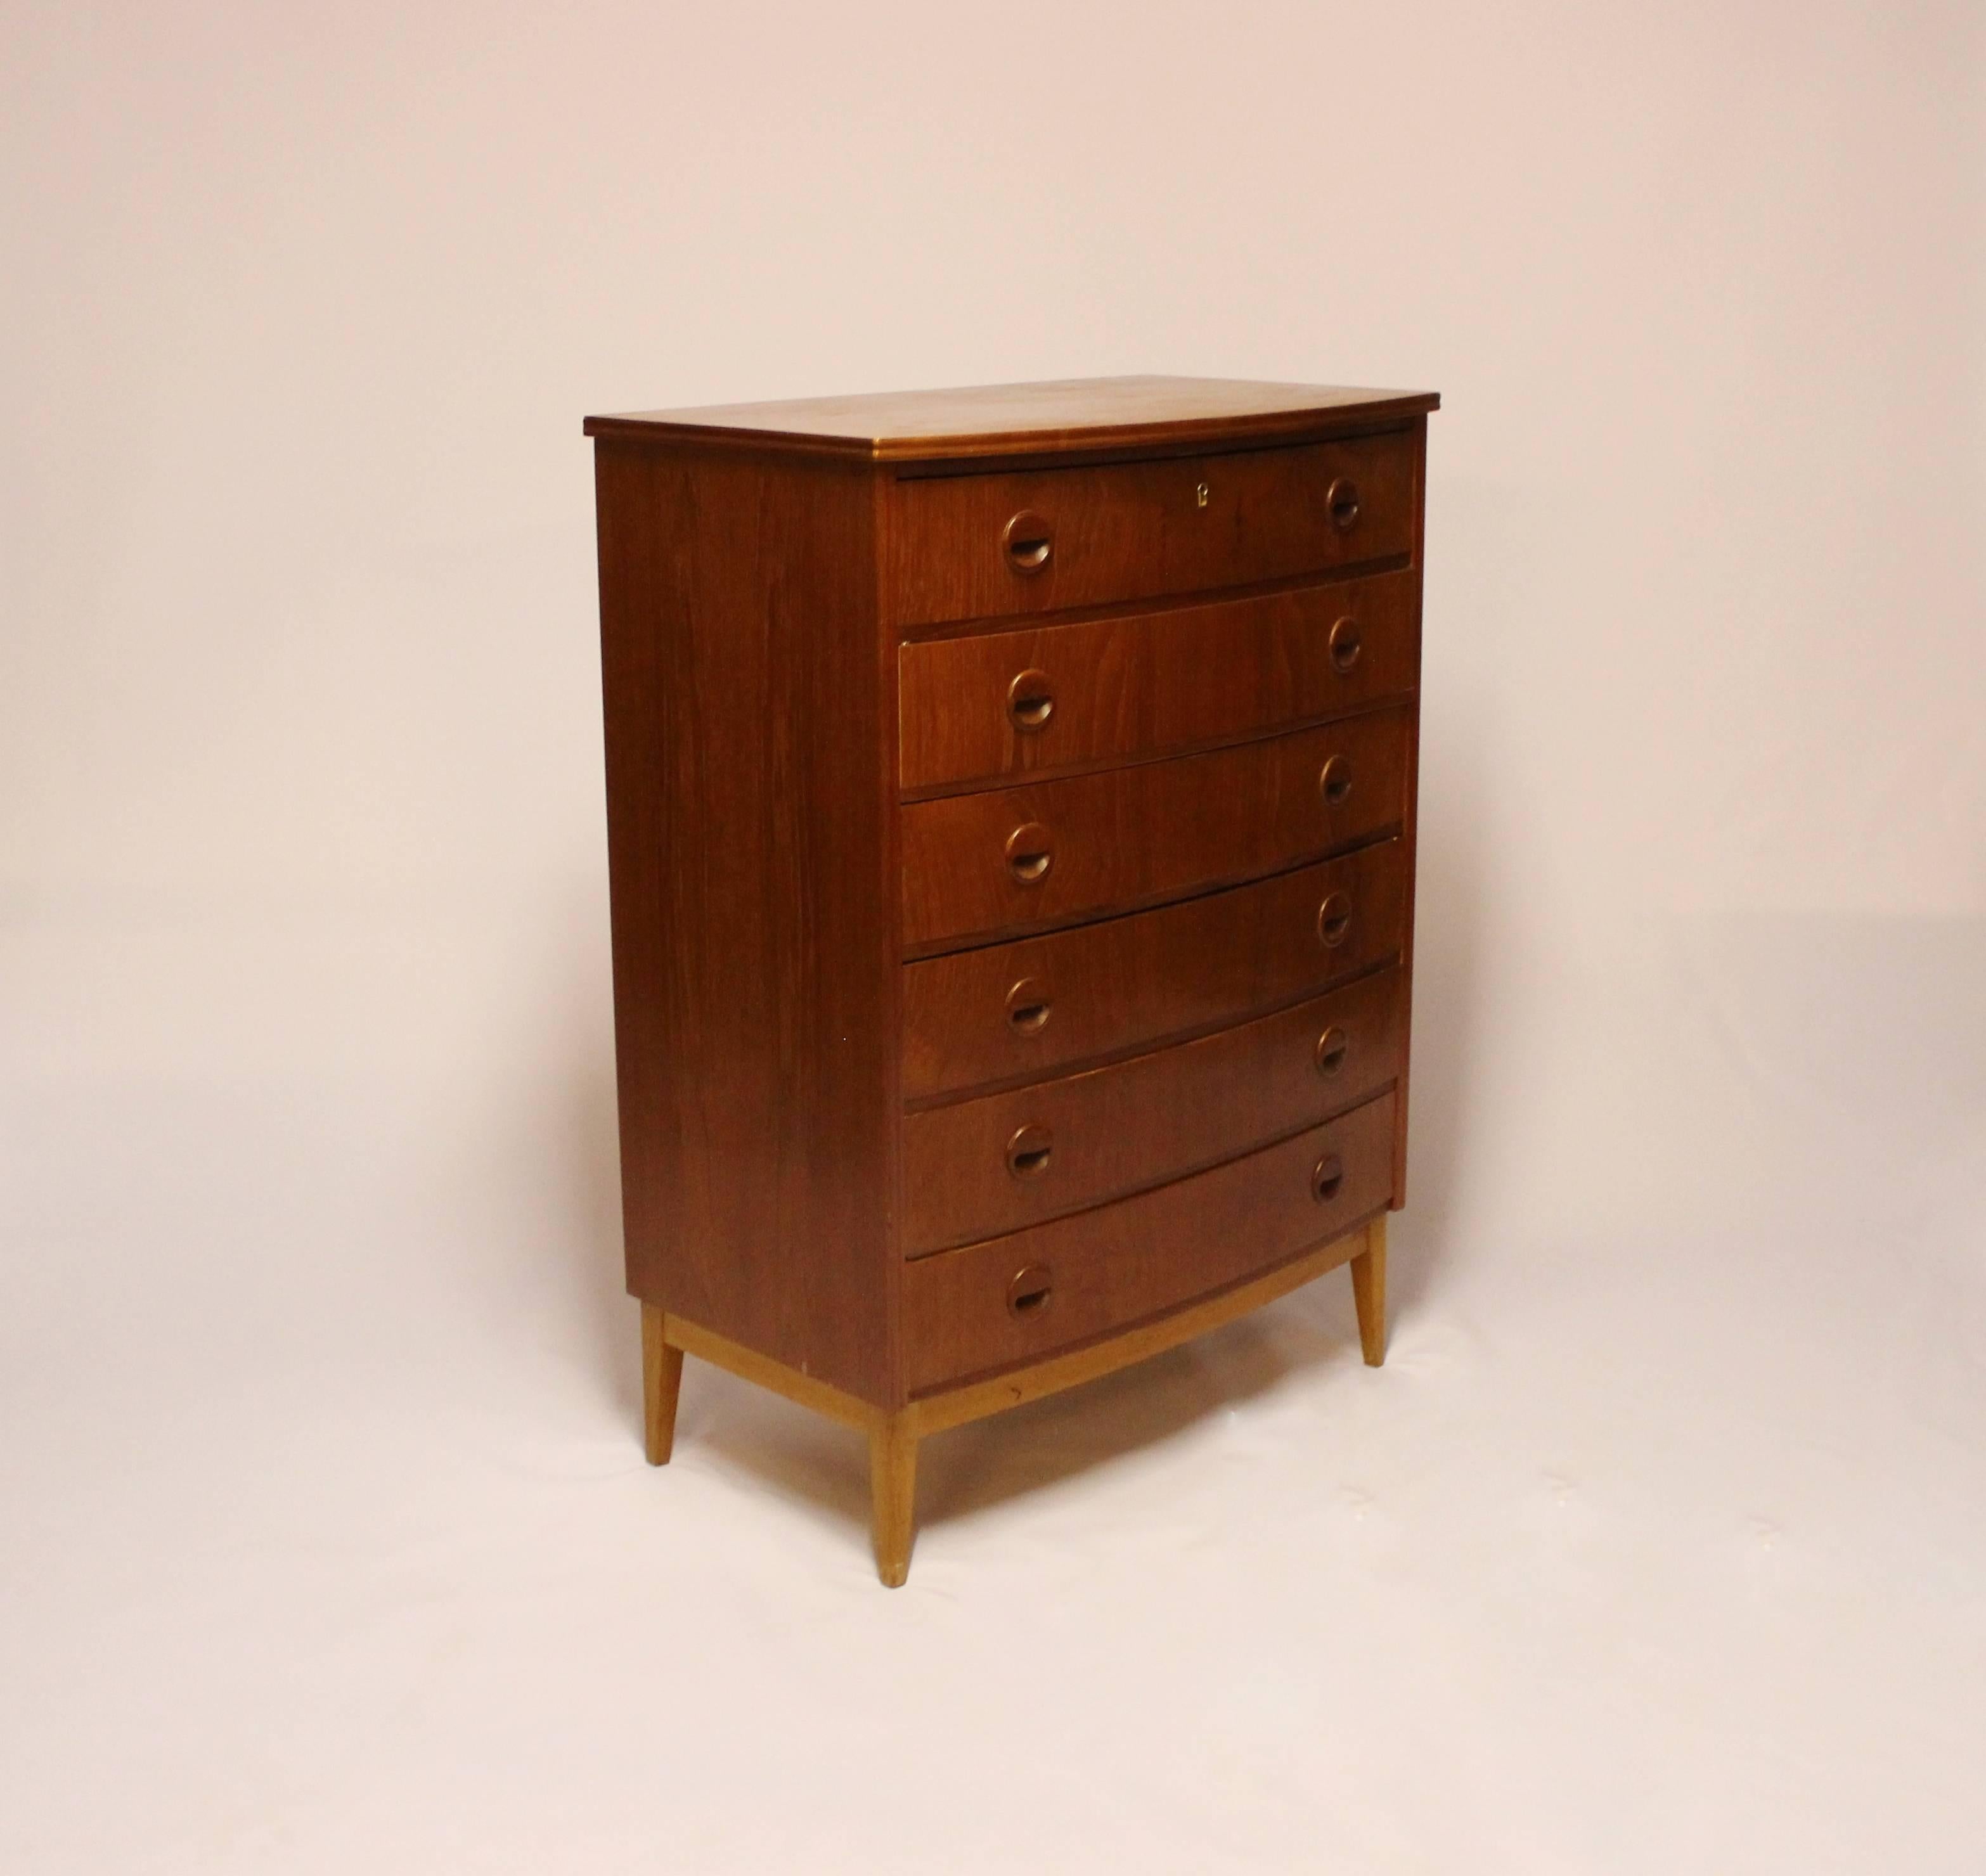 Chest with six drawers, in teak designed by Kai Kristiansen and from the 1960s. The chest is in great vintage condition.